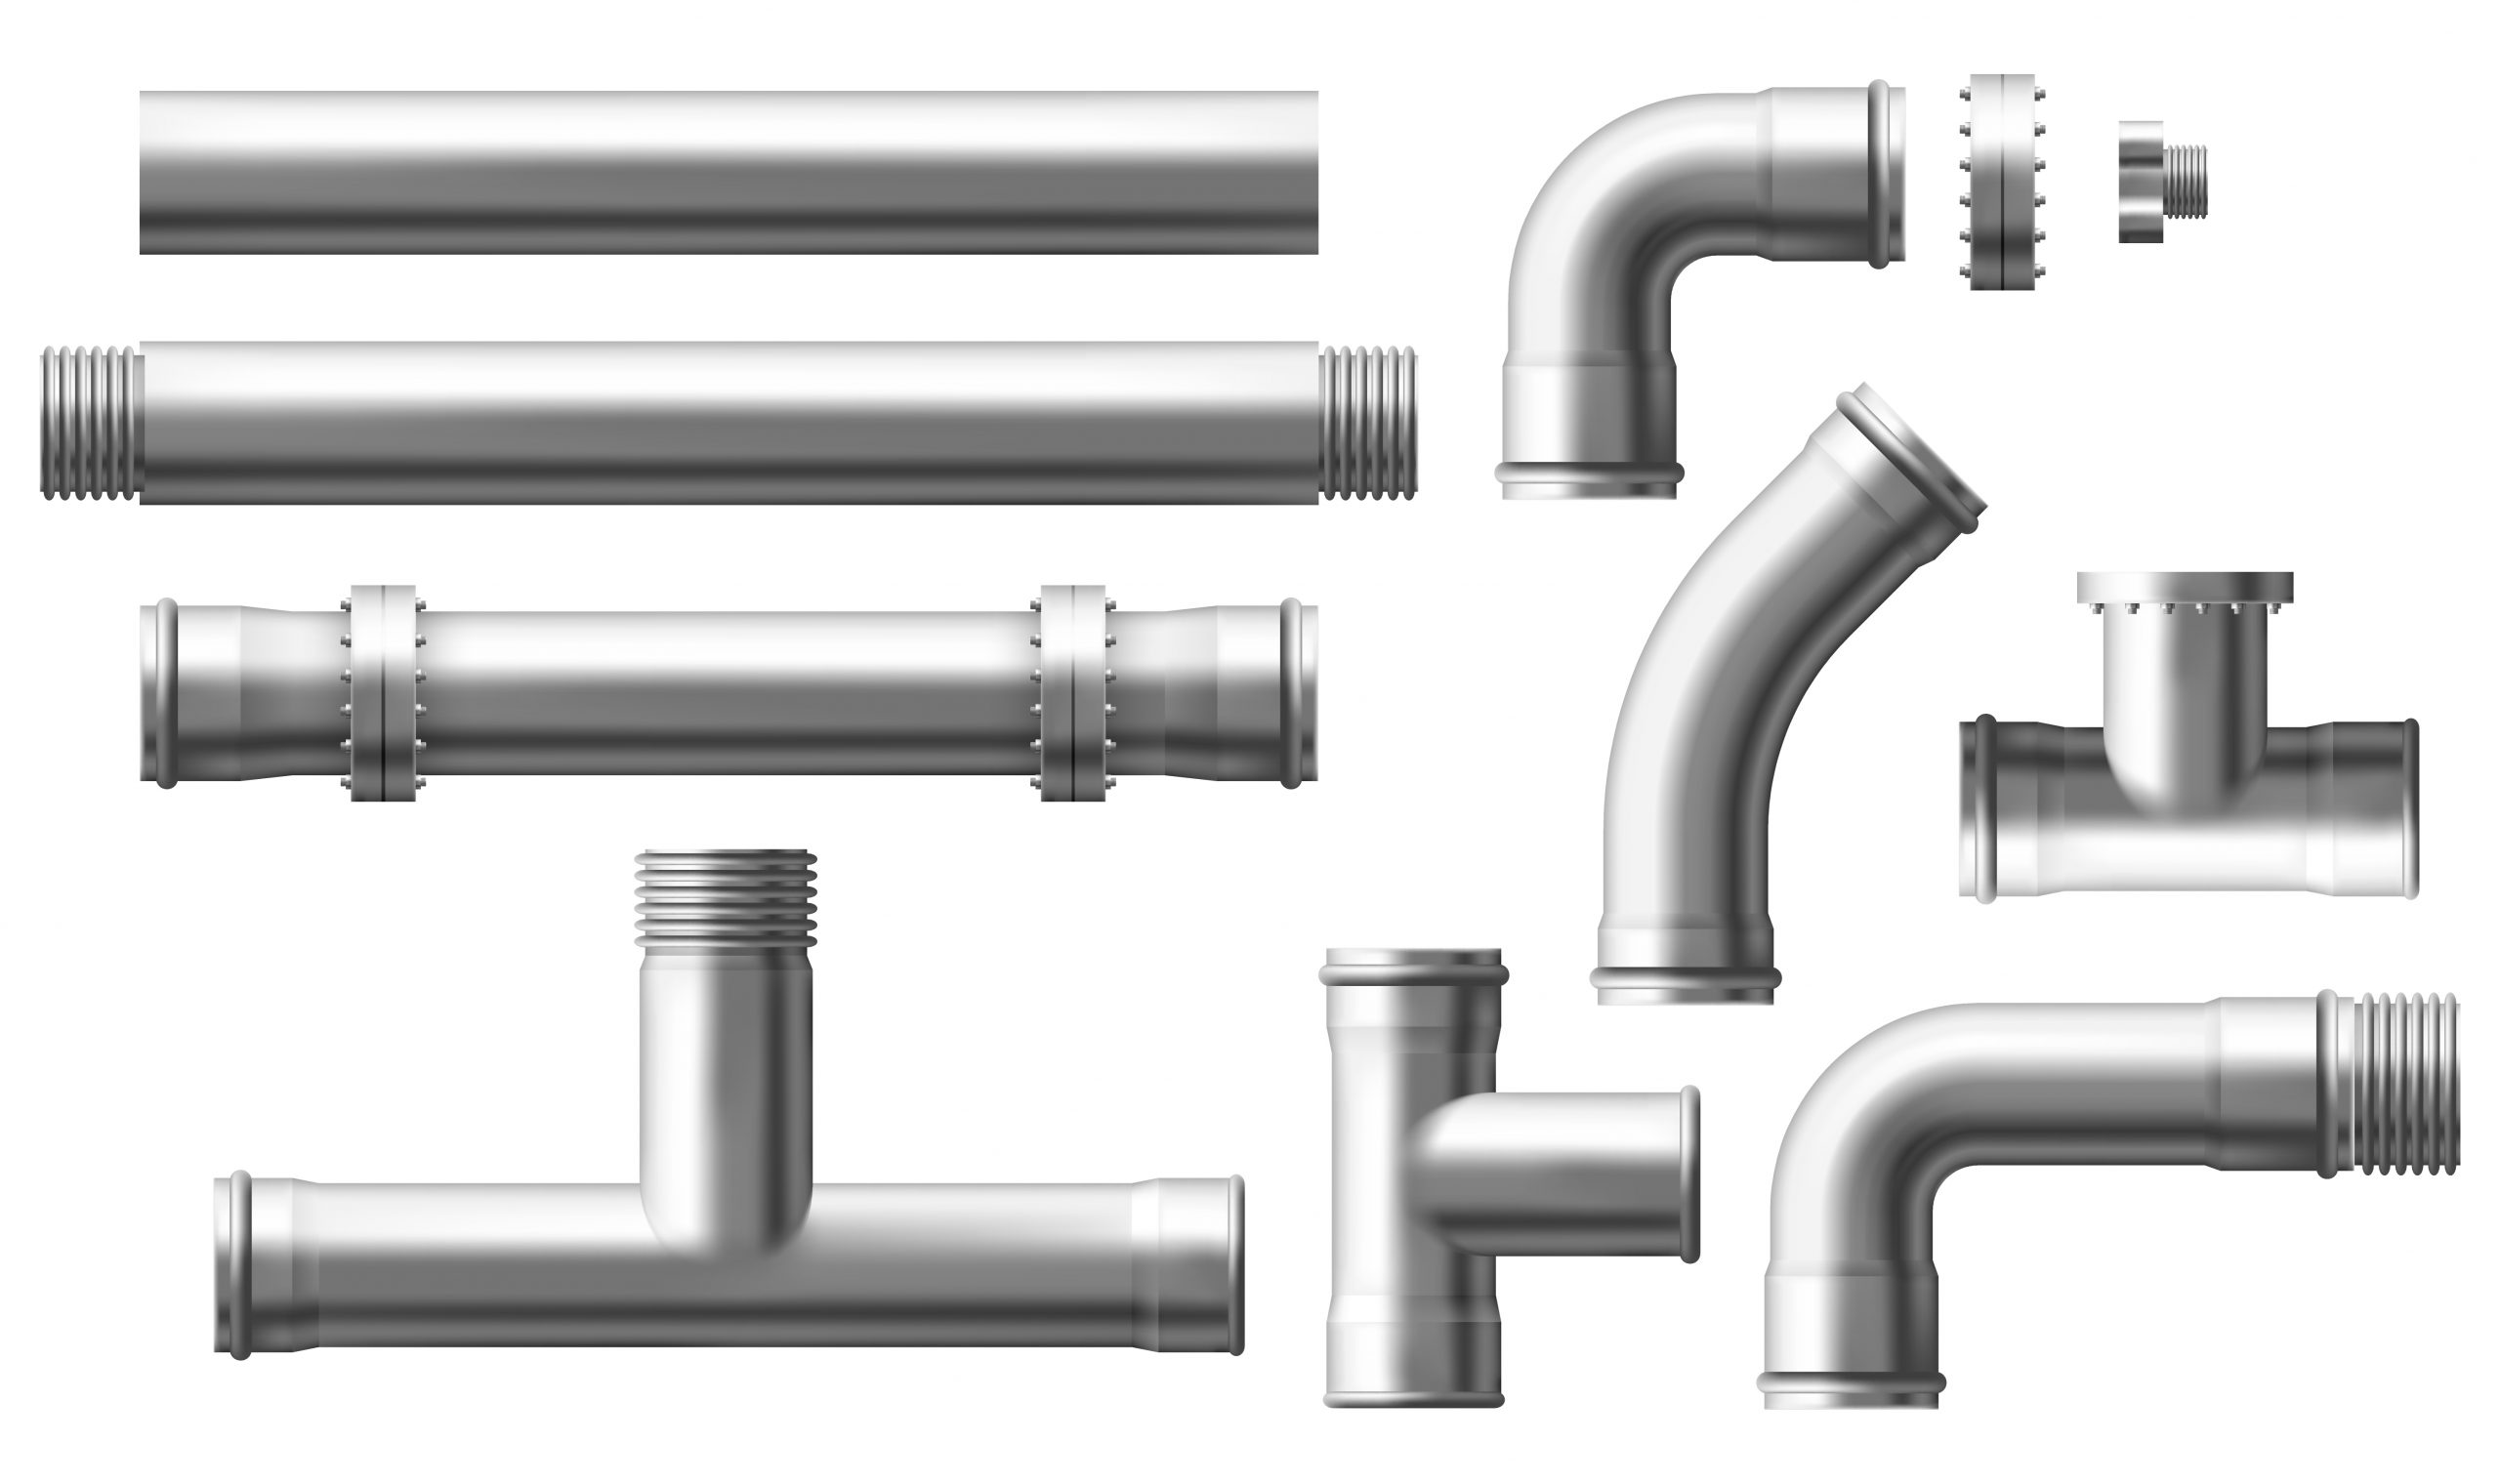 What are the different types of pipe strainers?